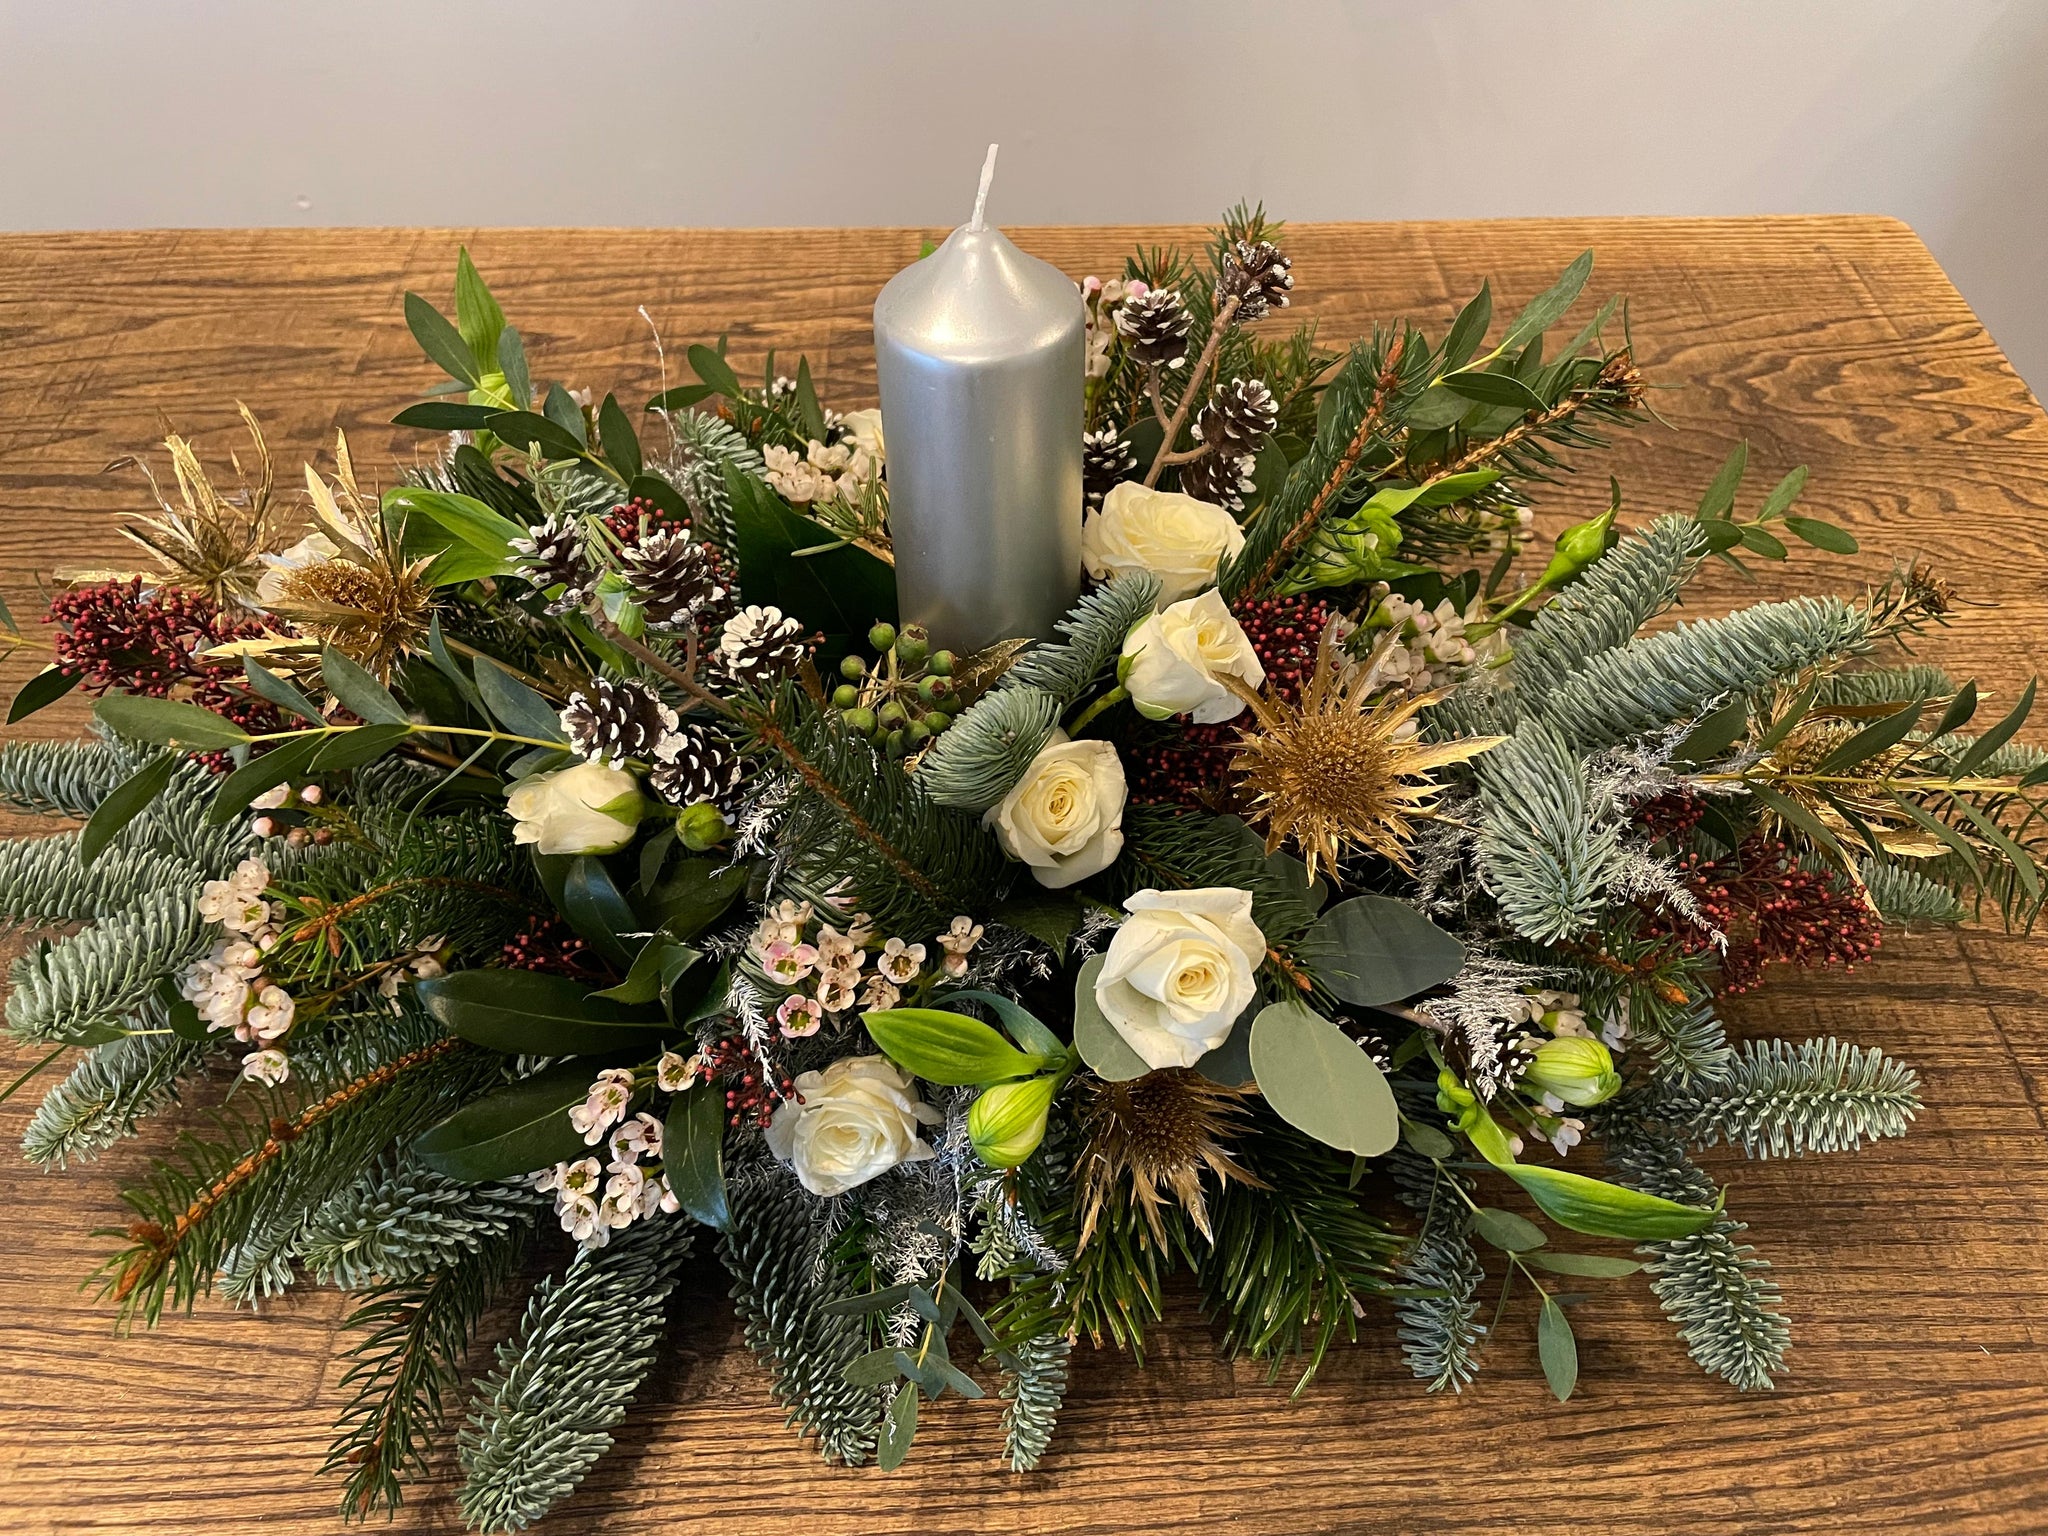 Christmas Table Centerpiece Workshop – Tuesday 19th December, Starting @ 11am (£75 per person) 2 hours